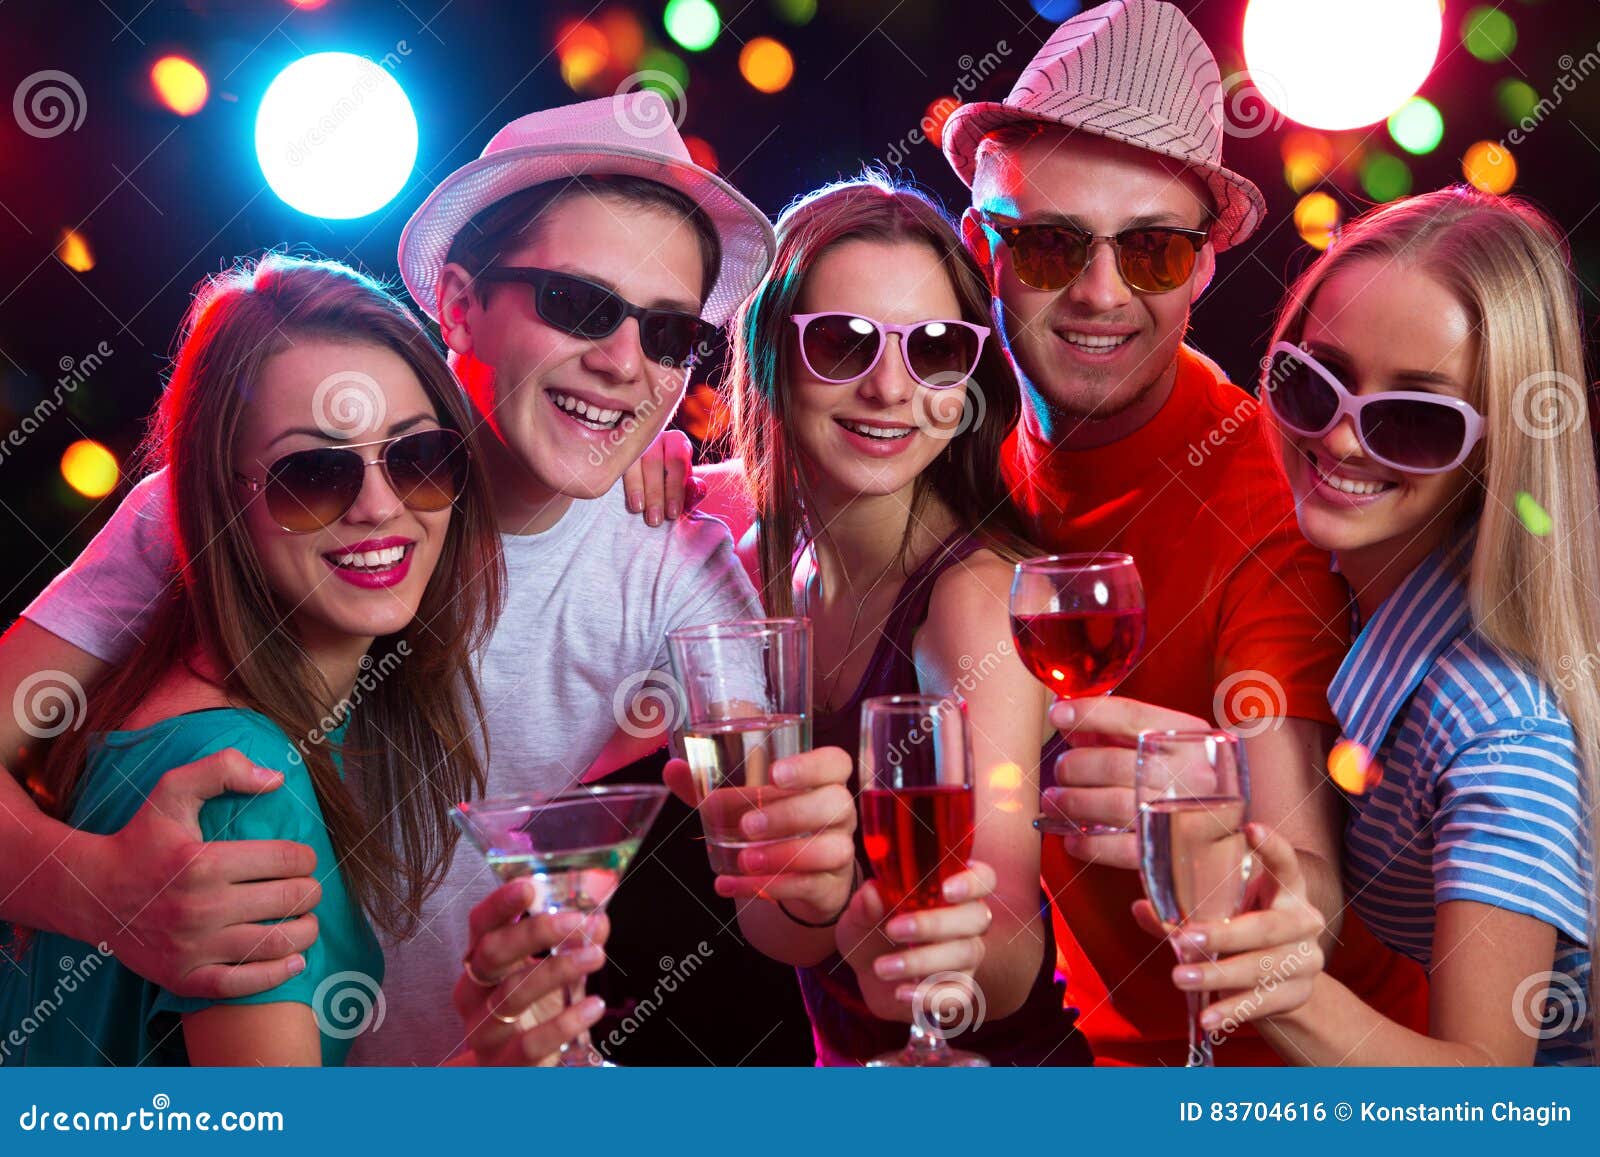 Group of Young People at Party Stock Photo - Image of female ...